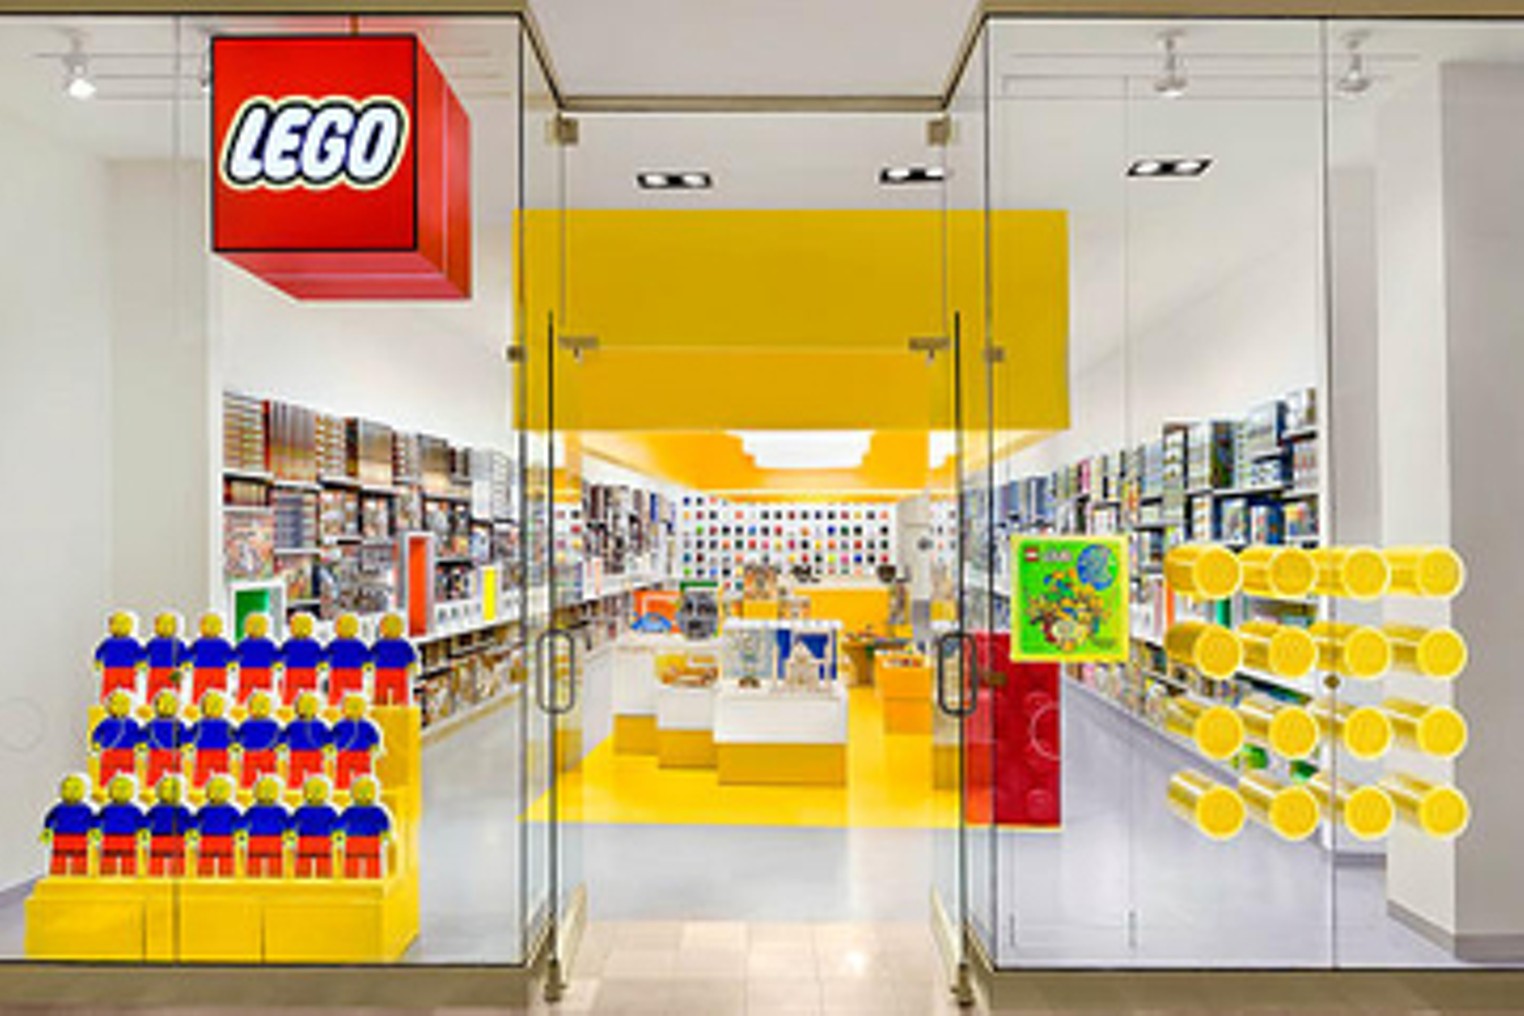 It's time to build at the Lego store in Ross Park Mall